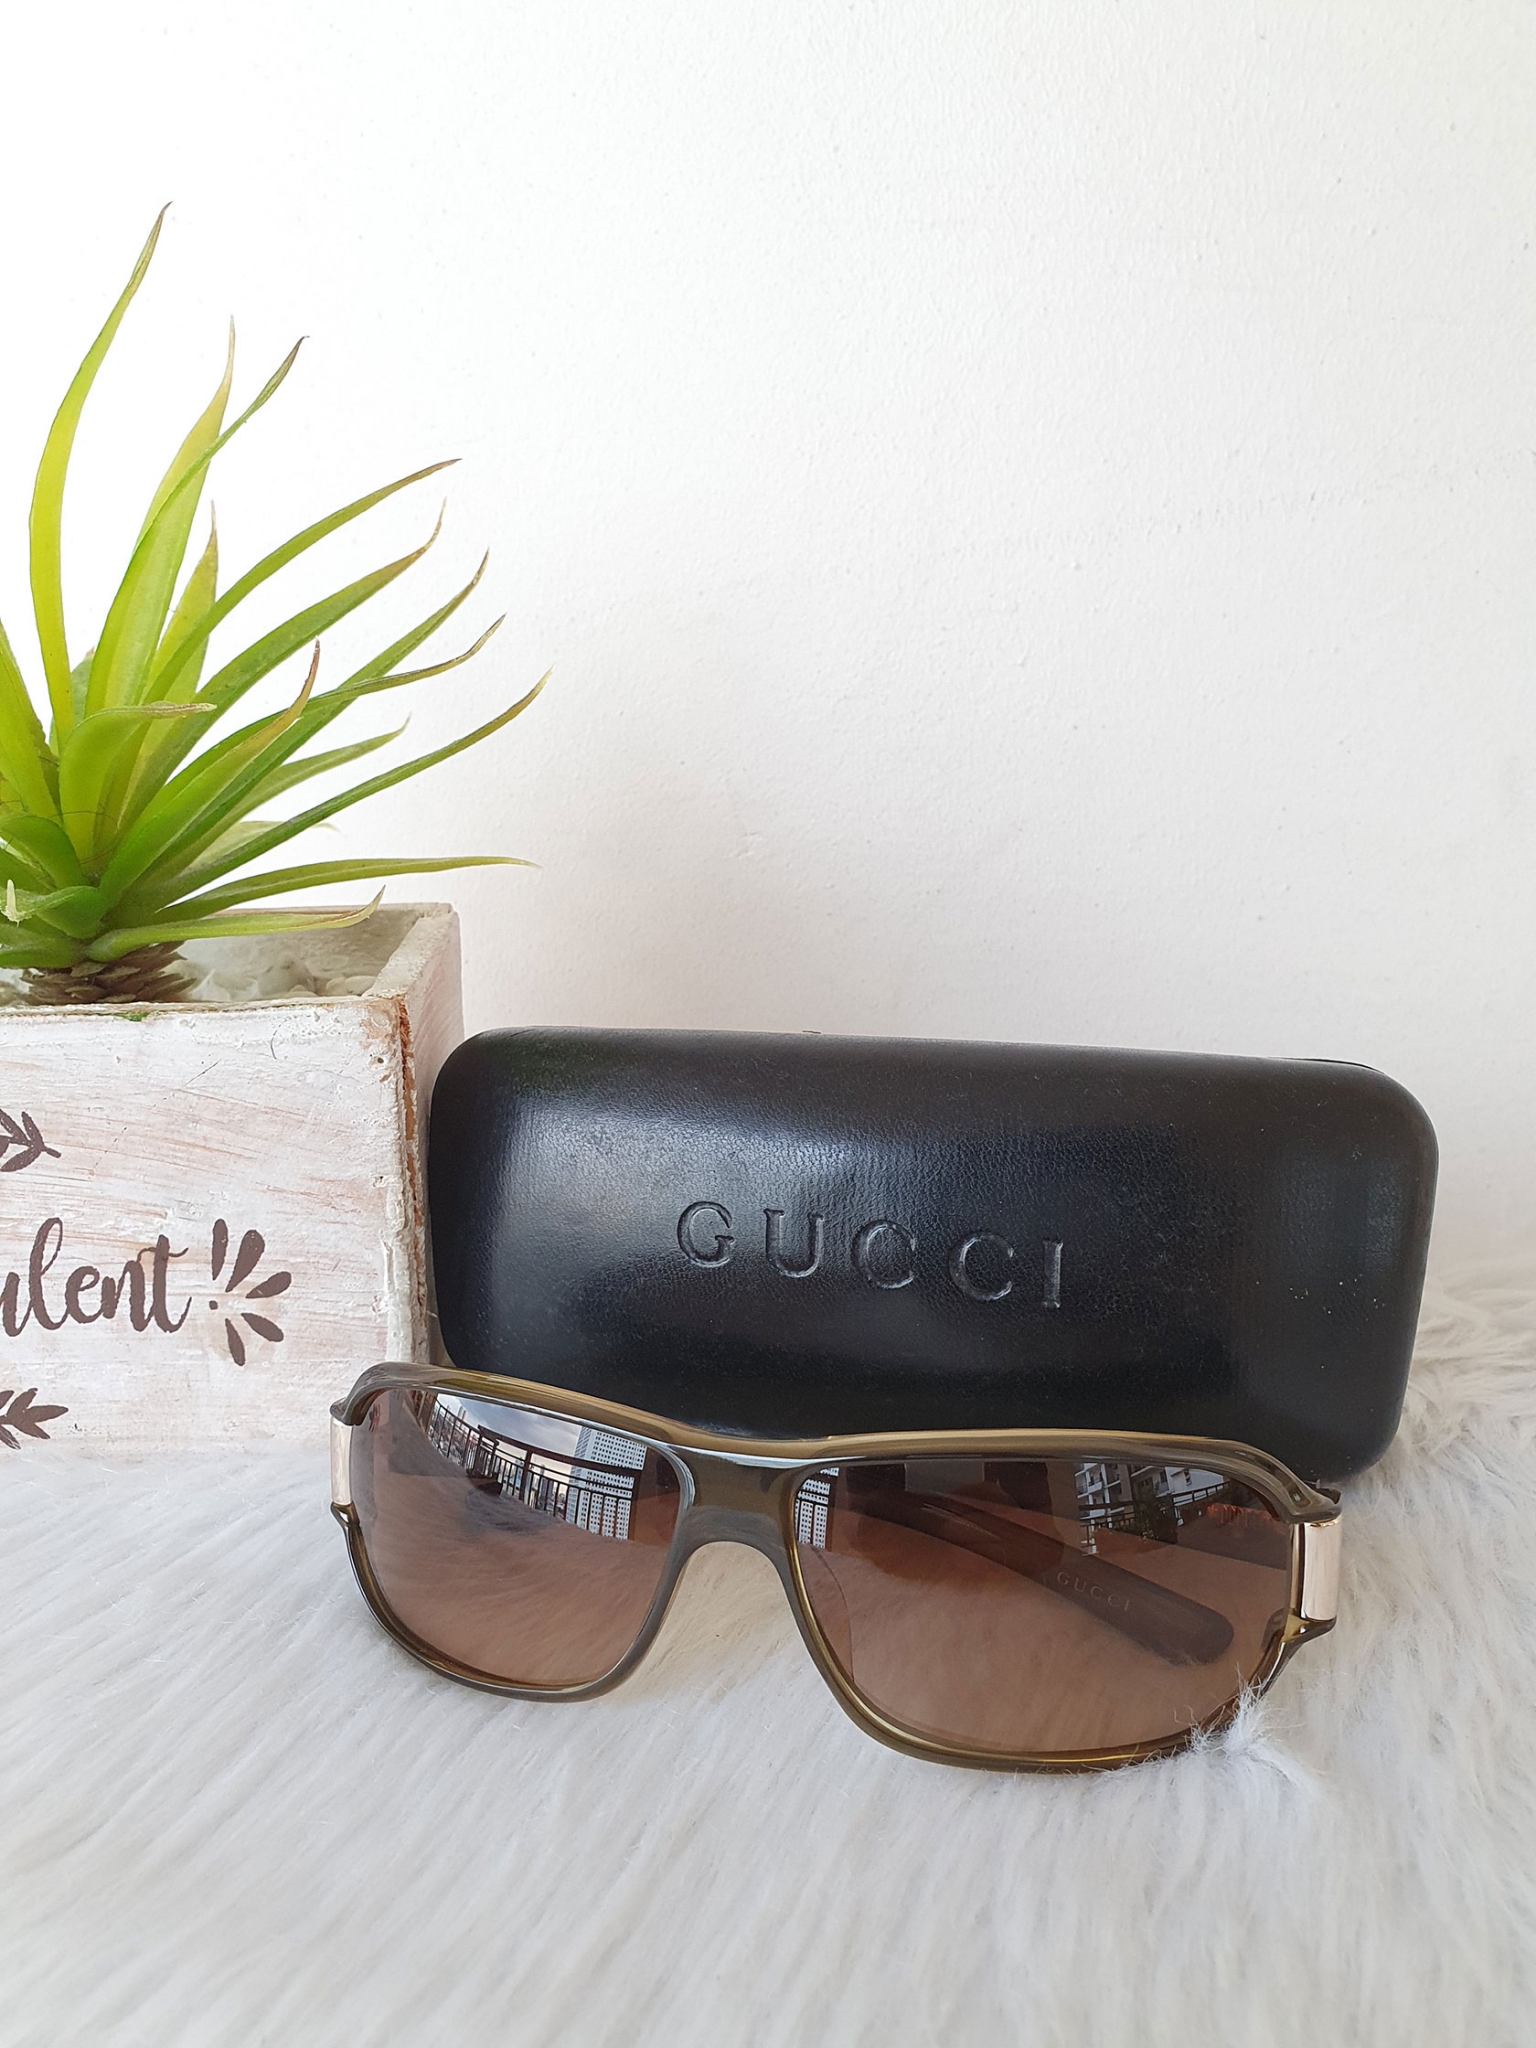 Gucci Shades in Excellent Condition | Mommy Micah - Luxury Bags Trusted ...